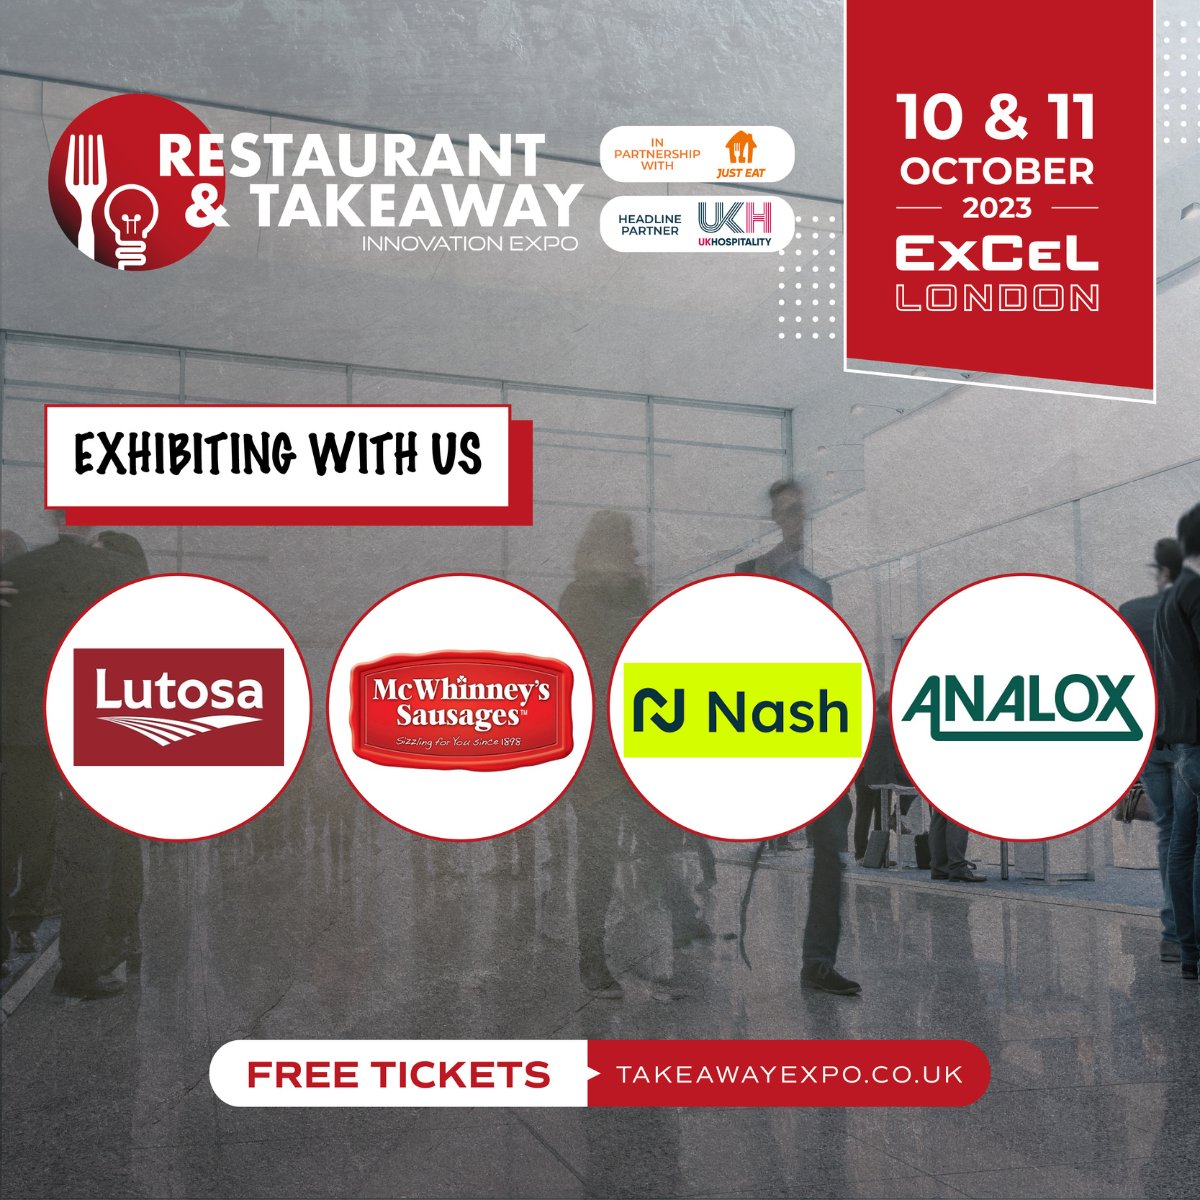 We are thrilled to announce Lutosa, McWhiney's Sausages, Nash & Analox Group are exhibiting at the Expo over 10th & 11th October! 👋 🎫 Get your FREE ticket here: bitly.ws/Sezr to discover all our innovative suppliers across @excellondon! 🎫 #RTIE23 #HOSPOB2B